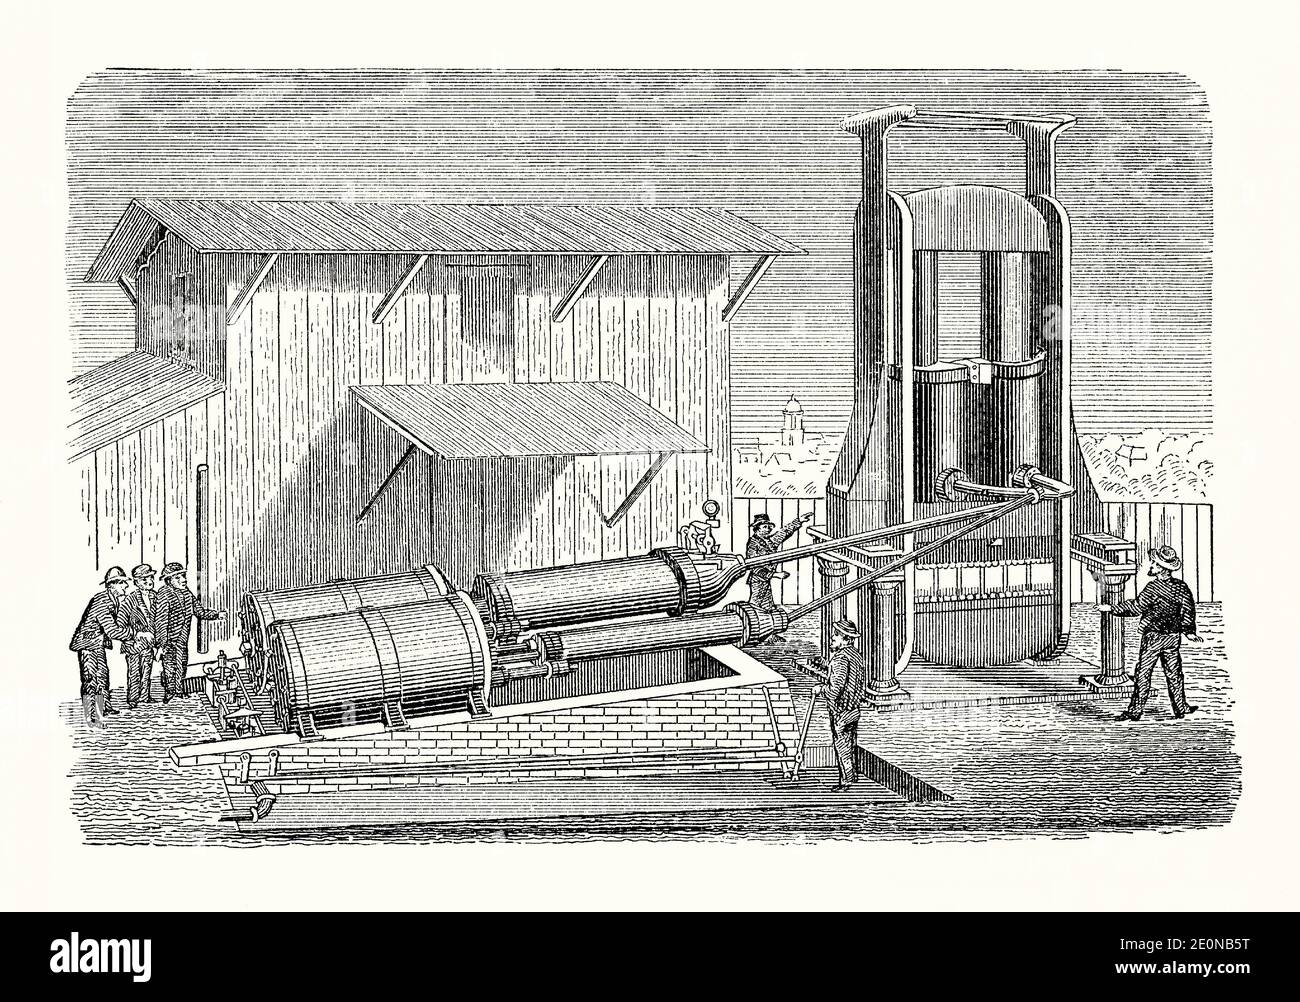 An old engraving of workers operating a hydraulic, steam baling press in the 1800s. It is from a Victorian mechanical engineering book of the 1880s. Live steam is admitted to the horizontal cylinders and chambers (left). Via connecting pipework, the pressure created forces the hydraulic, vertical pistons (right) to push down, compressing bales of cotton (or other material) held between the plates below. The resultant compressed bale was easier for handing and transportation. Stock Photo